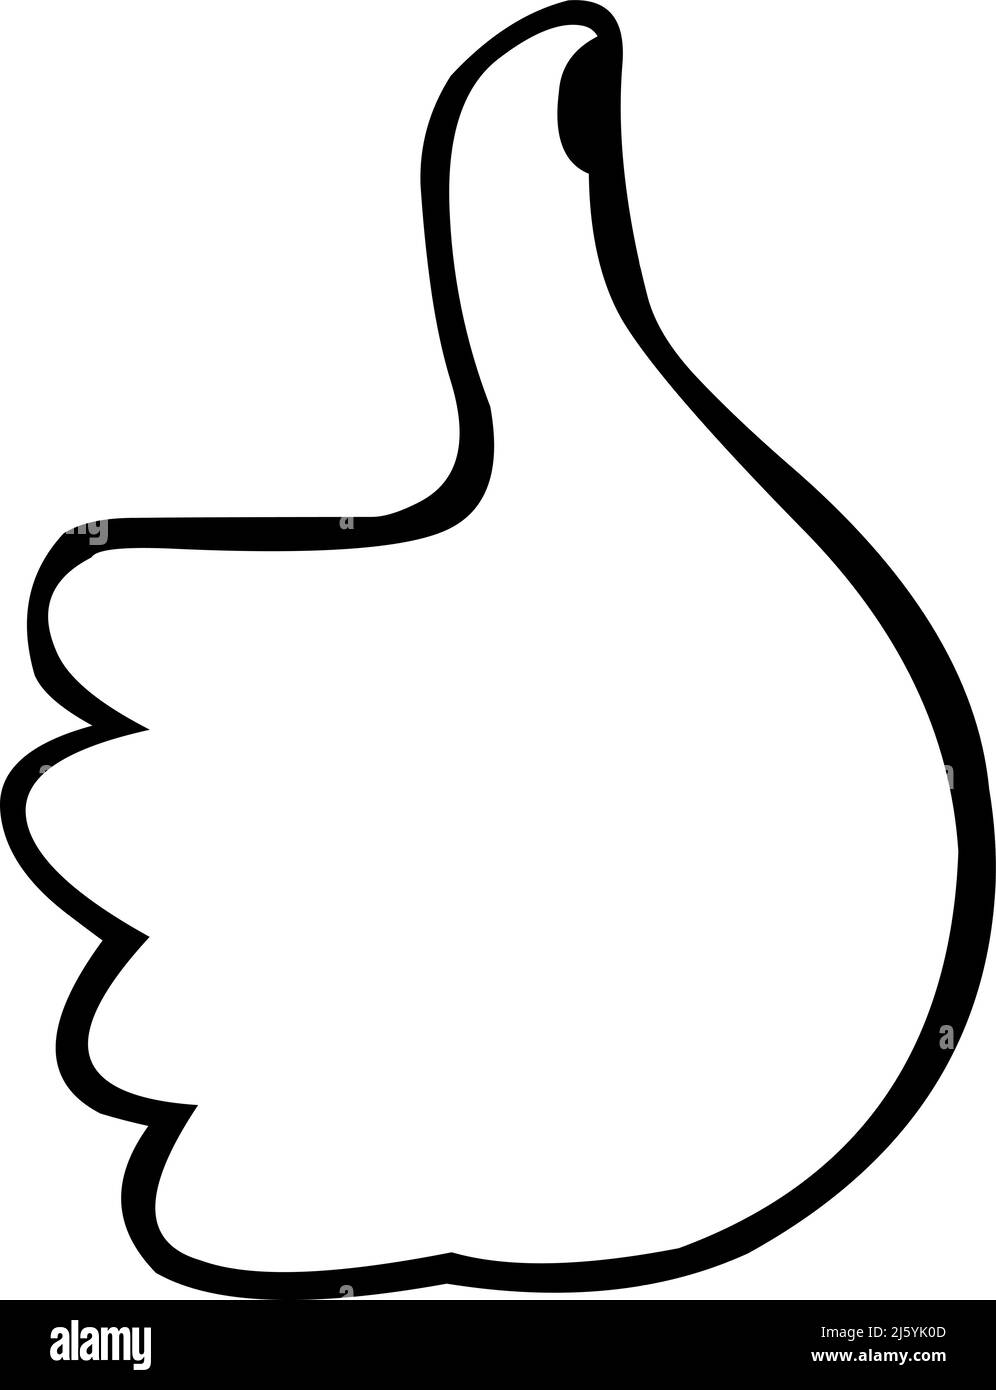 Vector illustration of a hand with thumb up, drawn in black and white Stock Vector